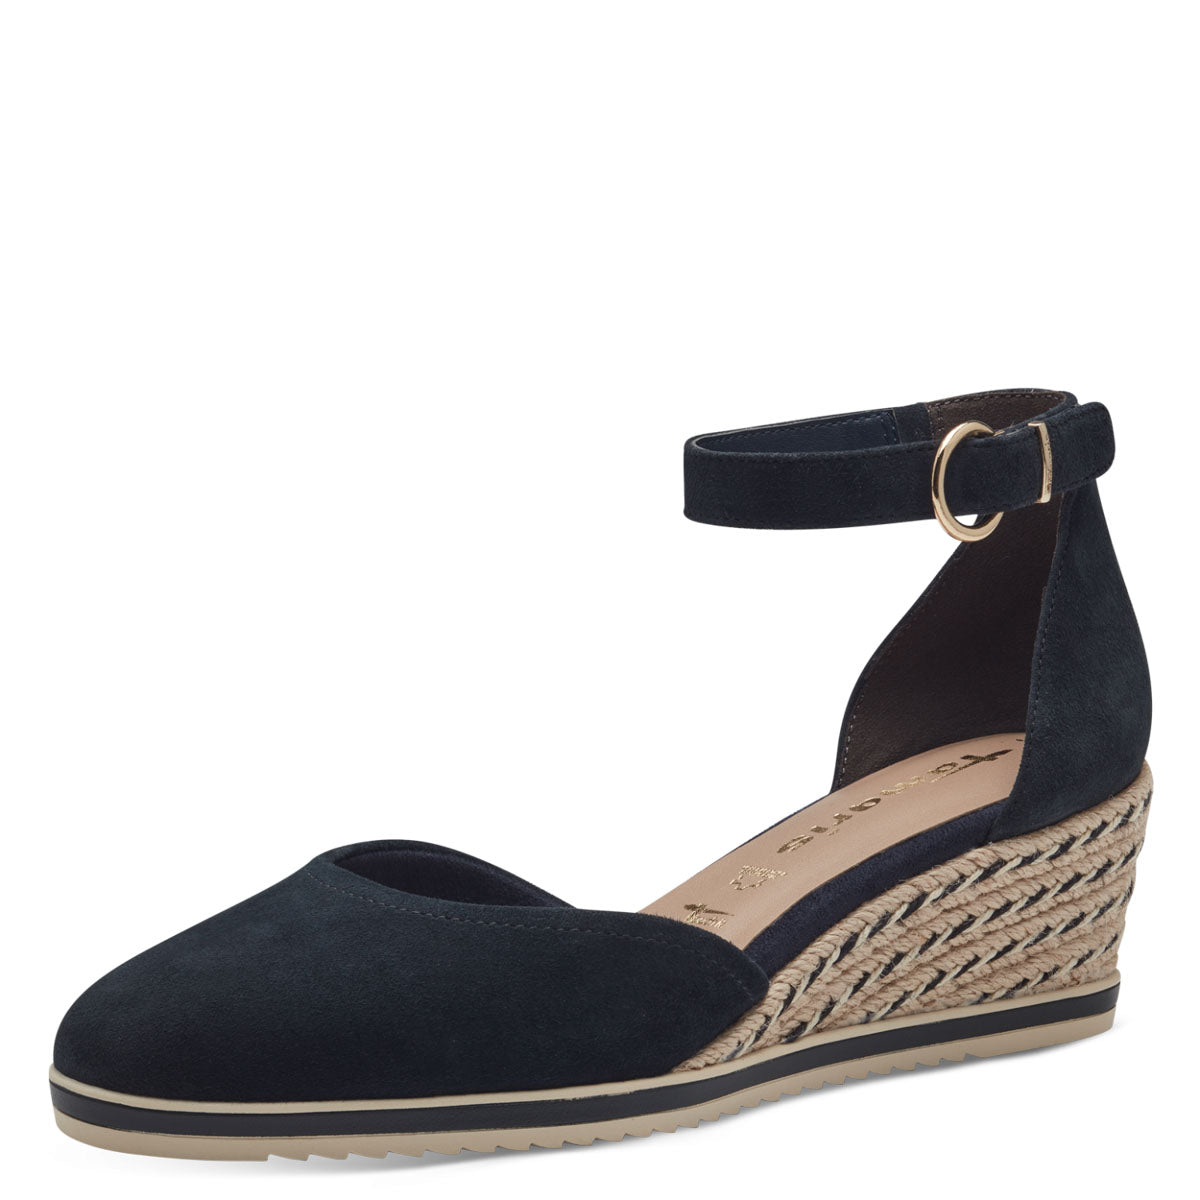 Angled perspective highlighting the espadrille detailing.